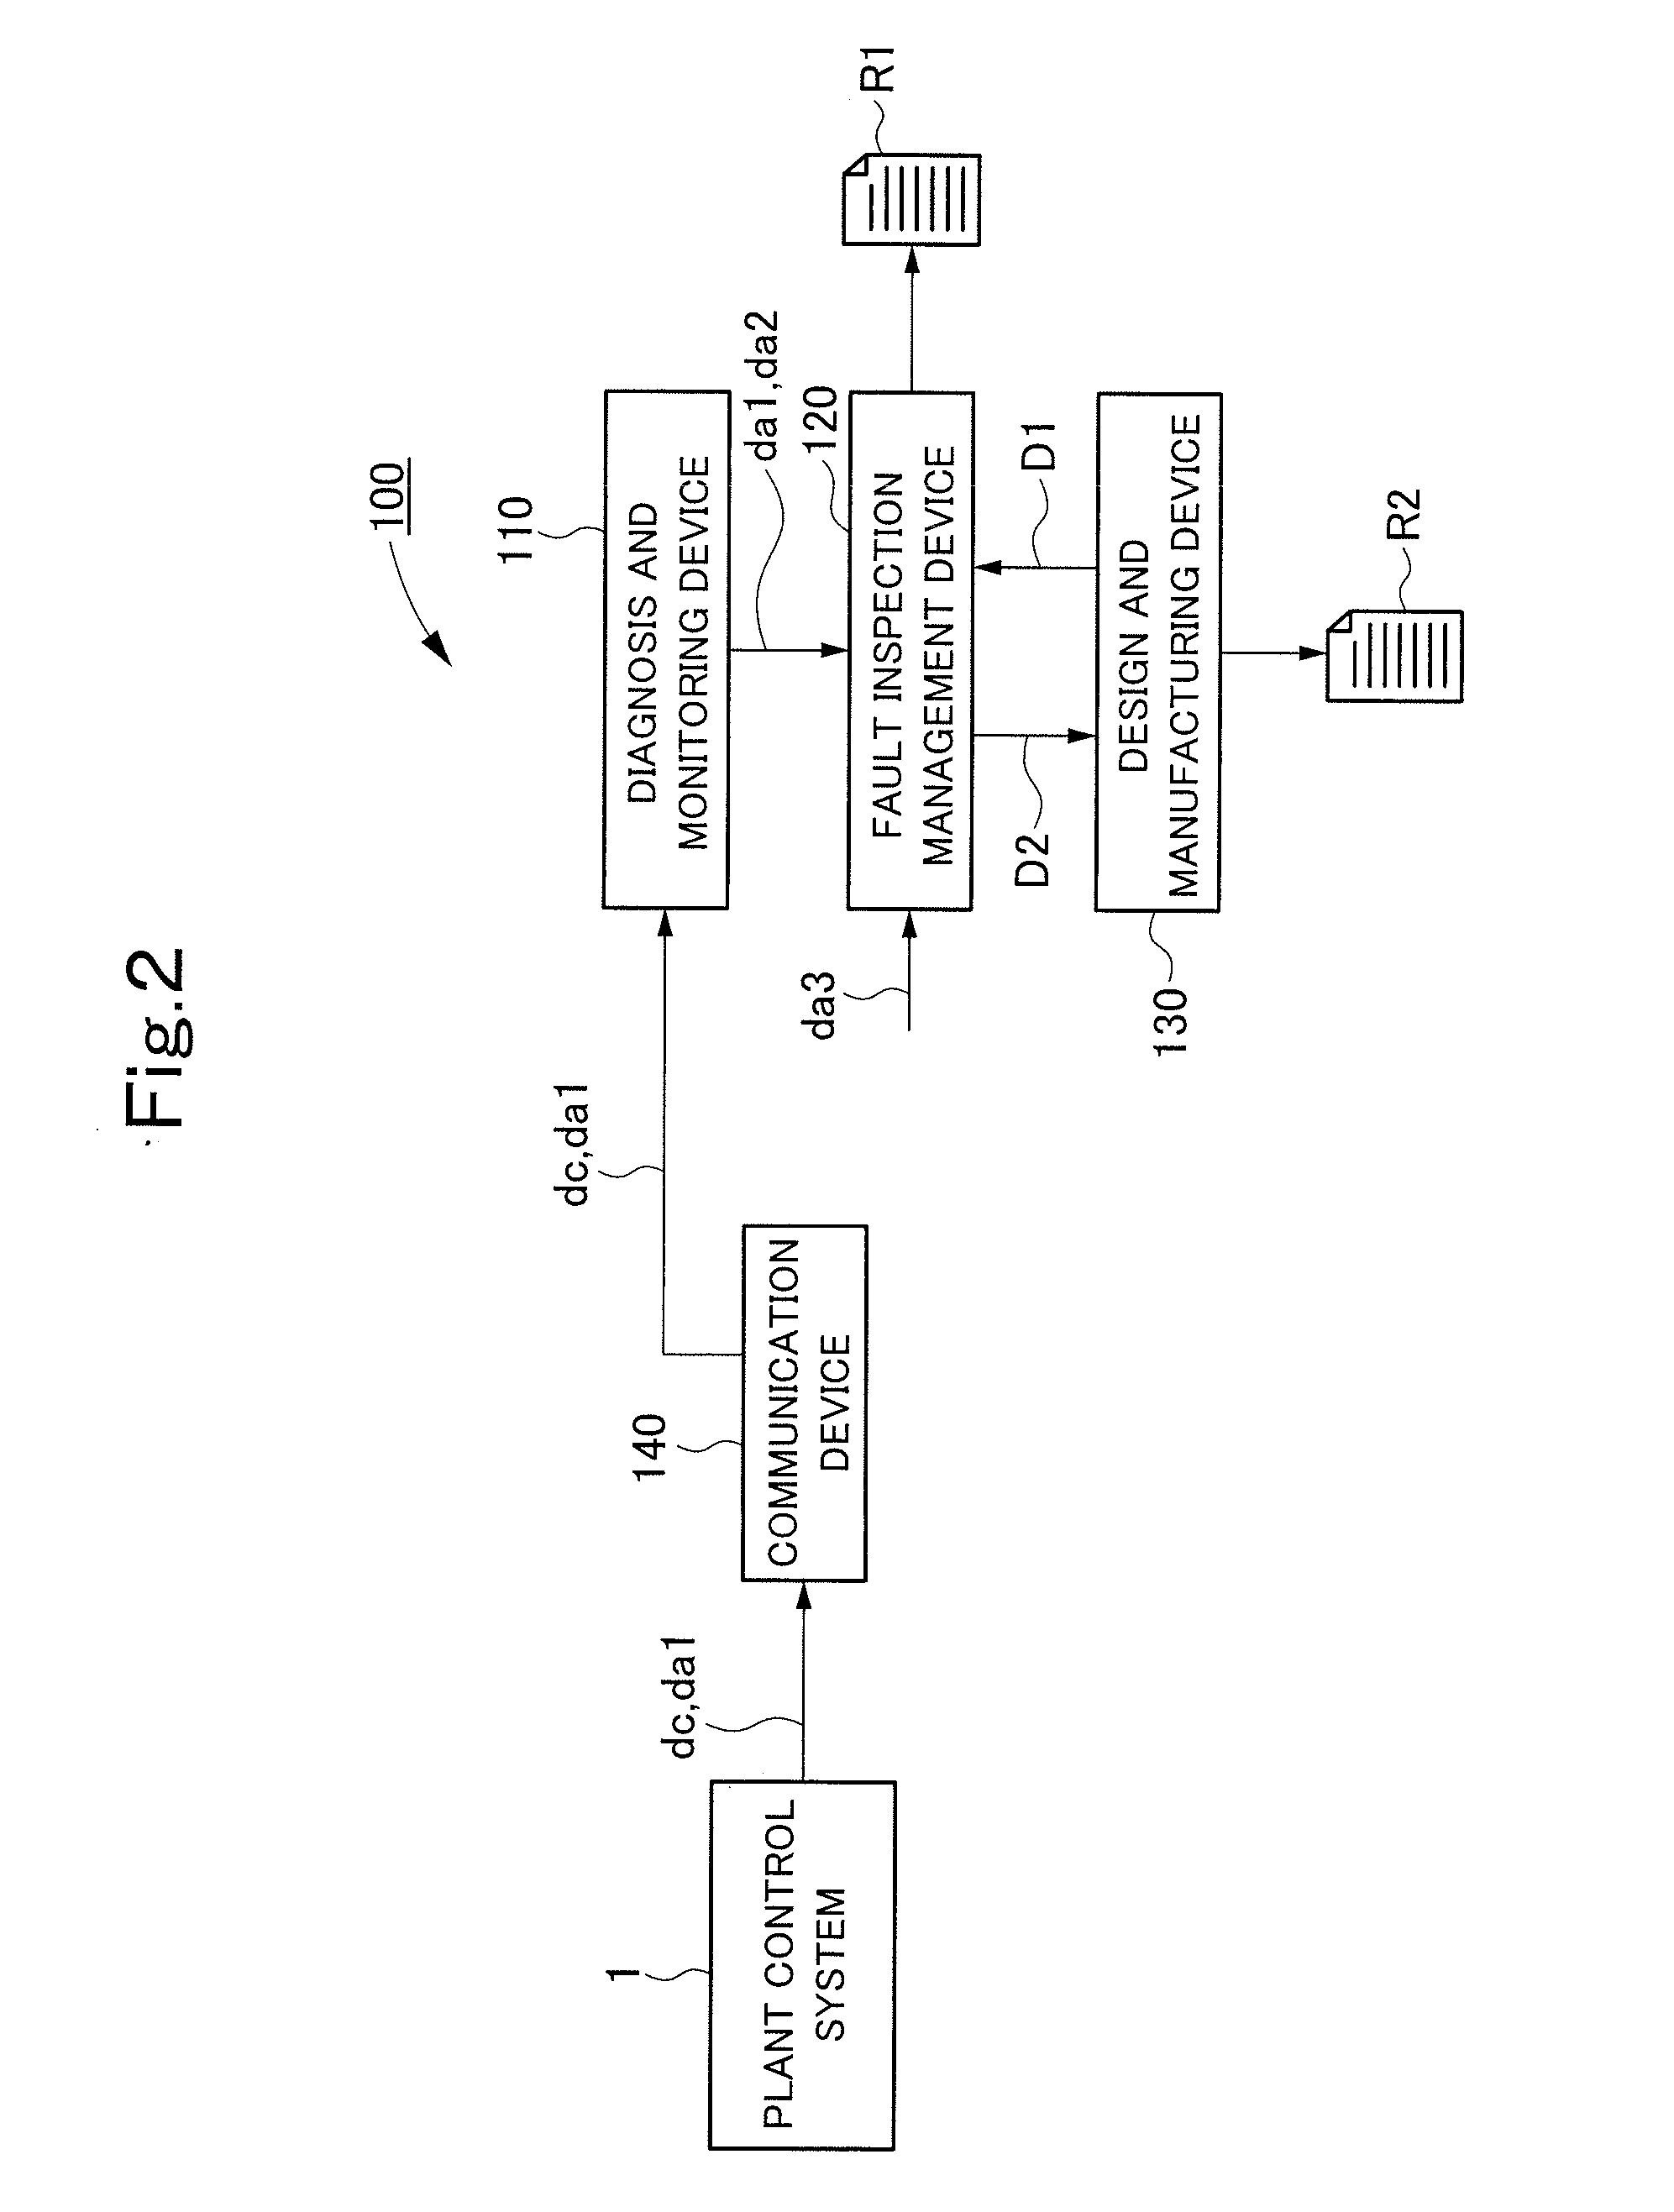 Plant safety design assistance device and plant monitoring and maintenance assistance device